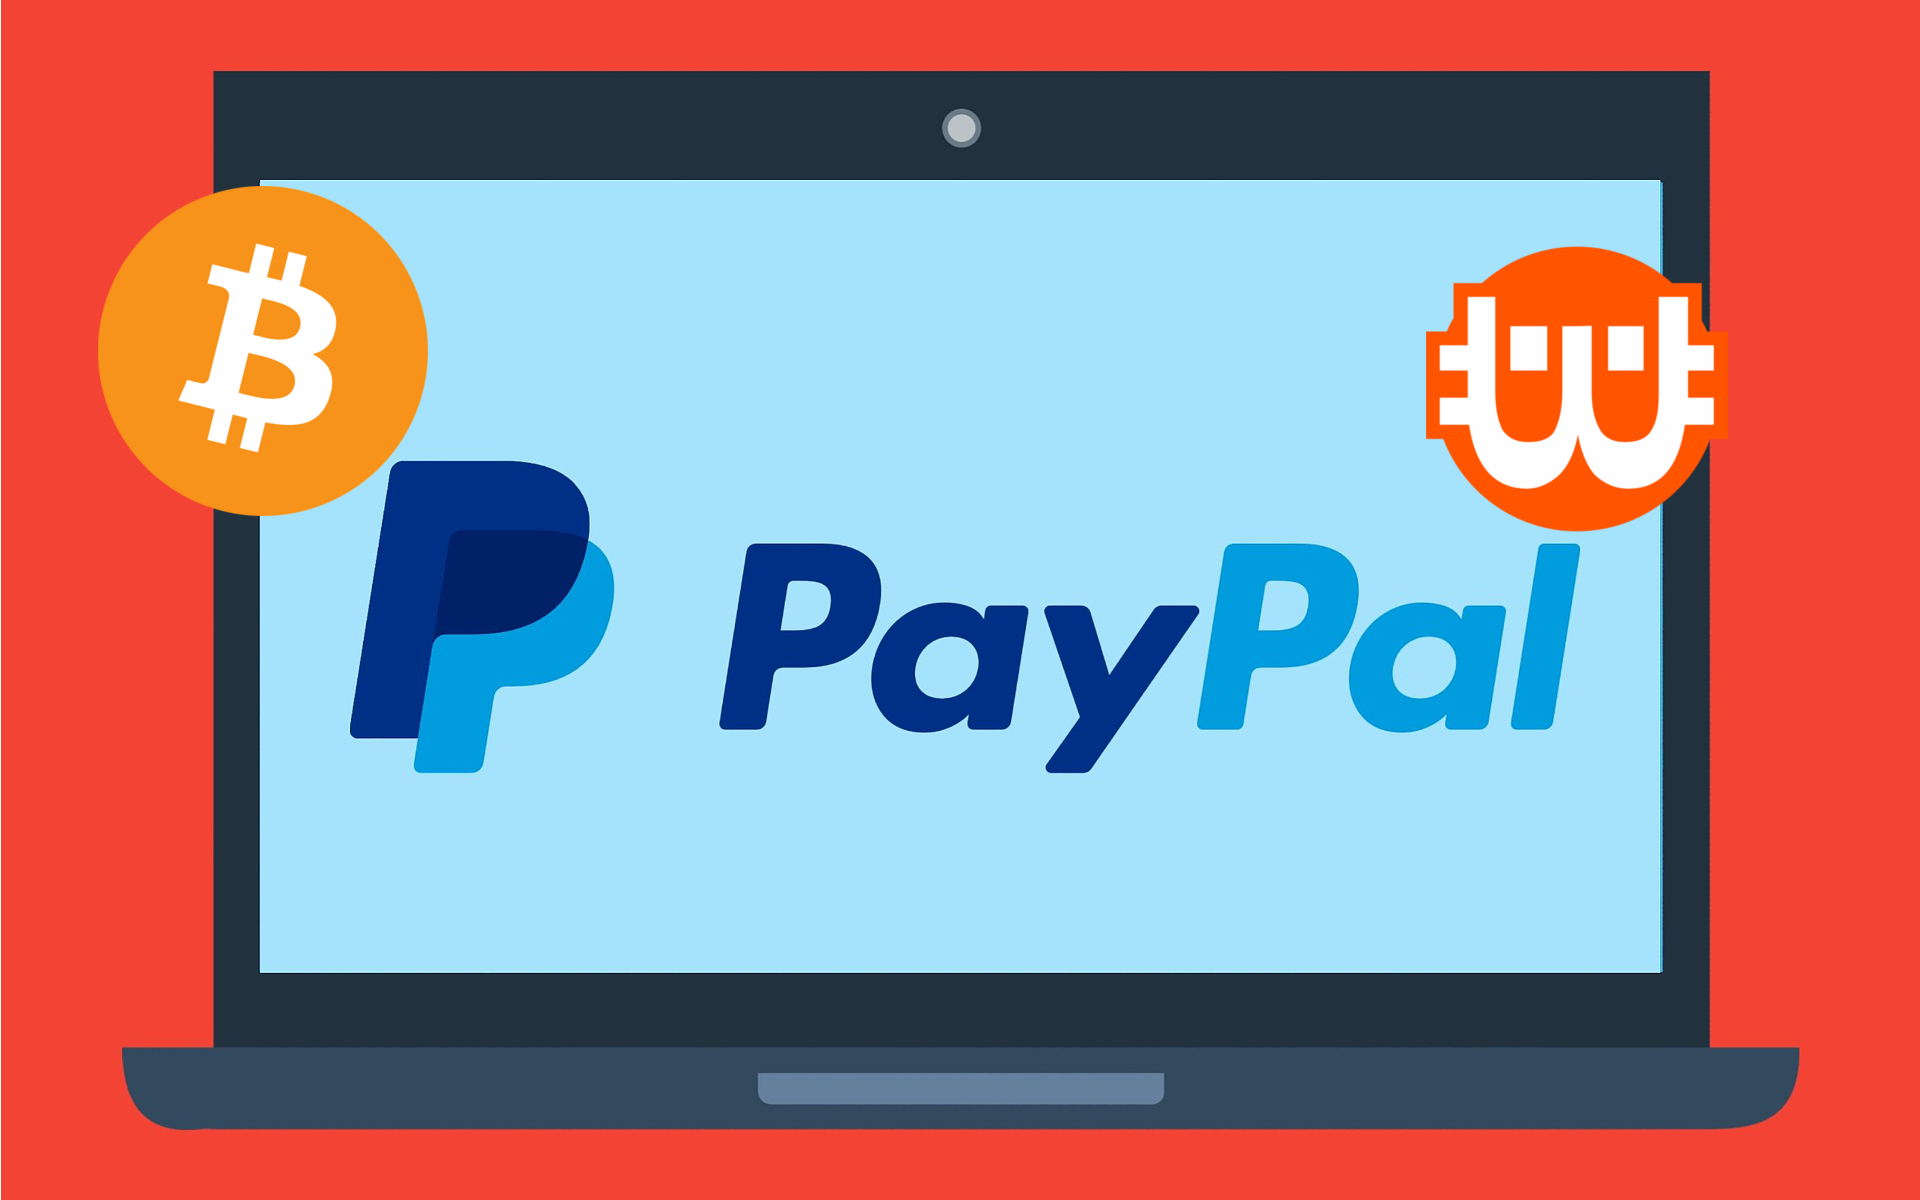 Paypal is pausing cryptocurrency purchases in the UK